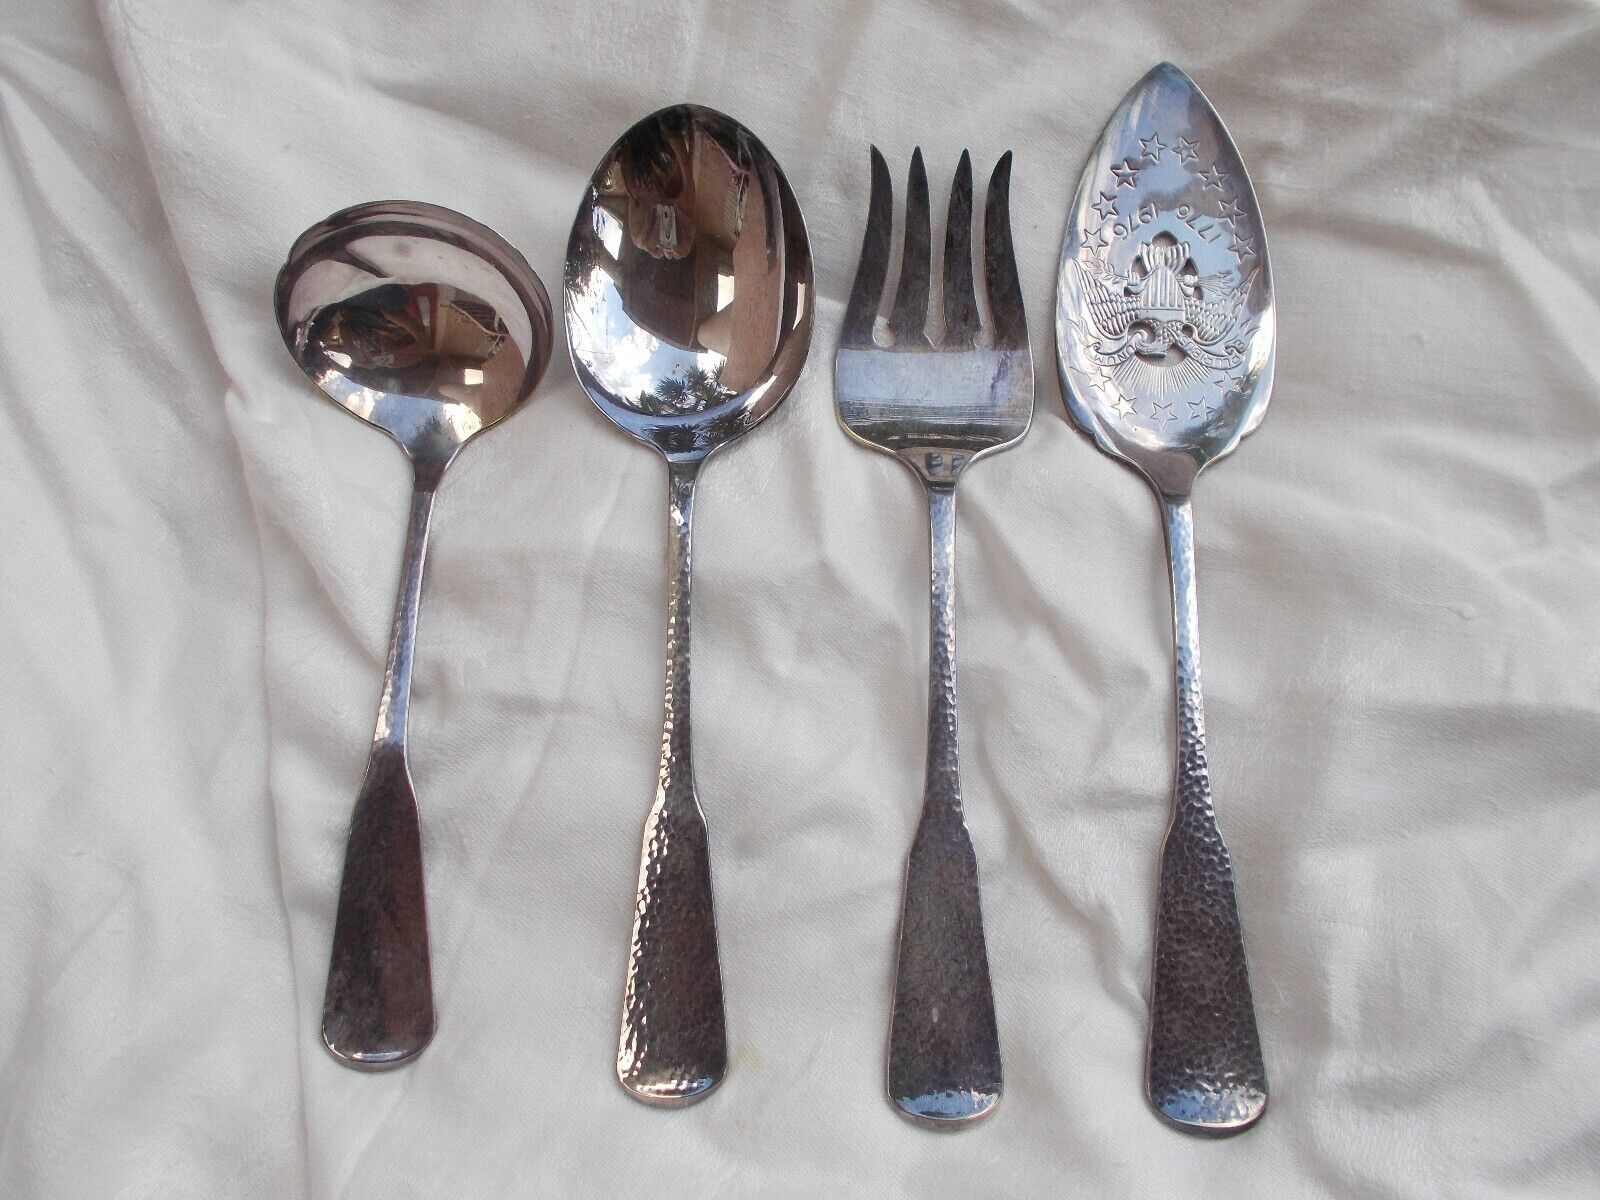 1881 Rogers FIRST COLONY 4 Serving Pcs Hammered Silverplate? Flatware Oneida Ltd